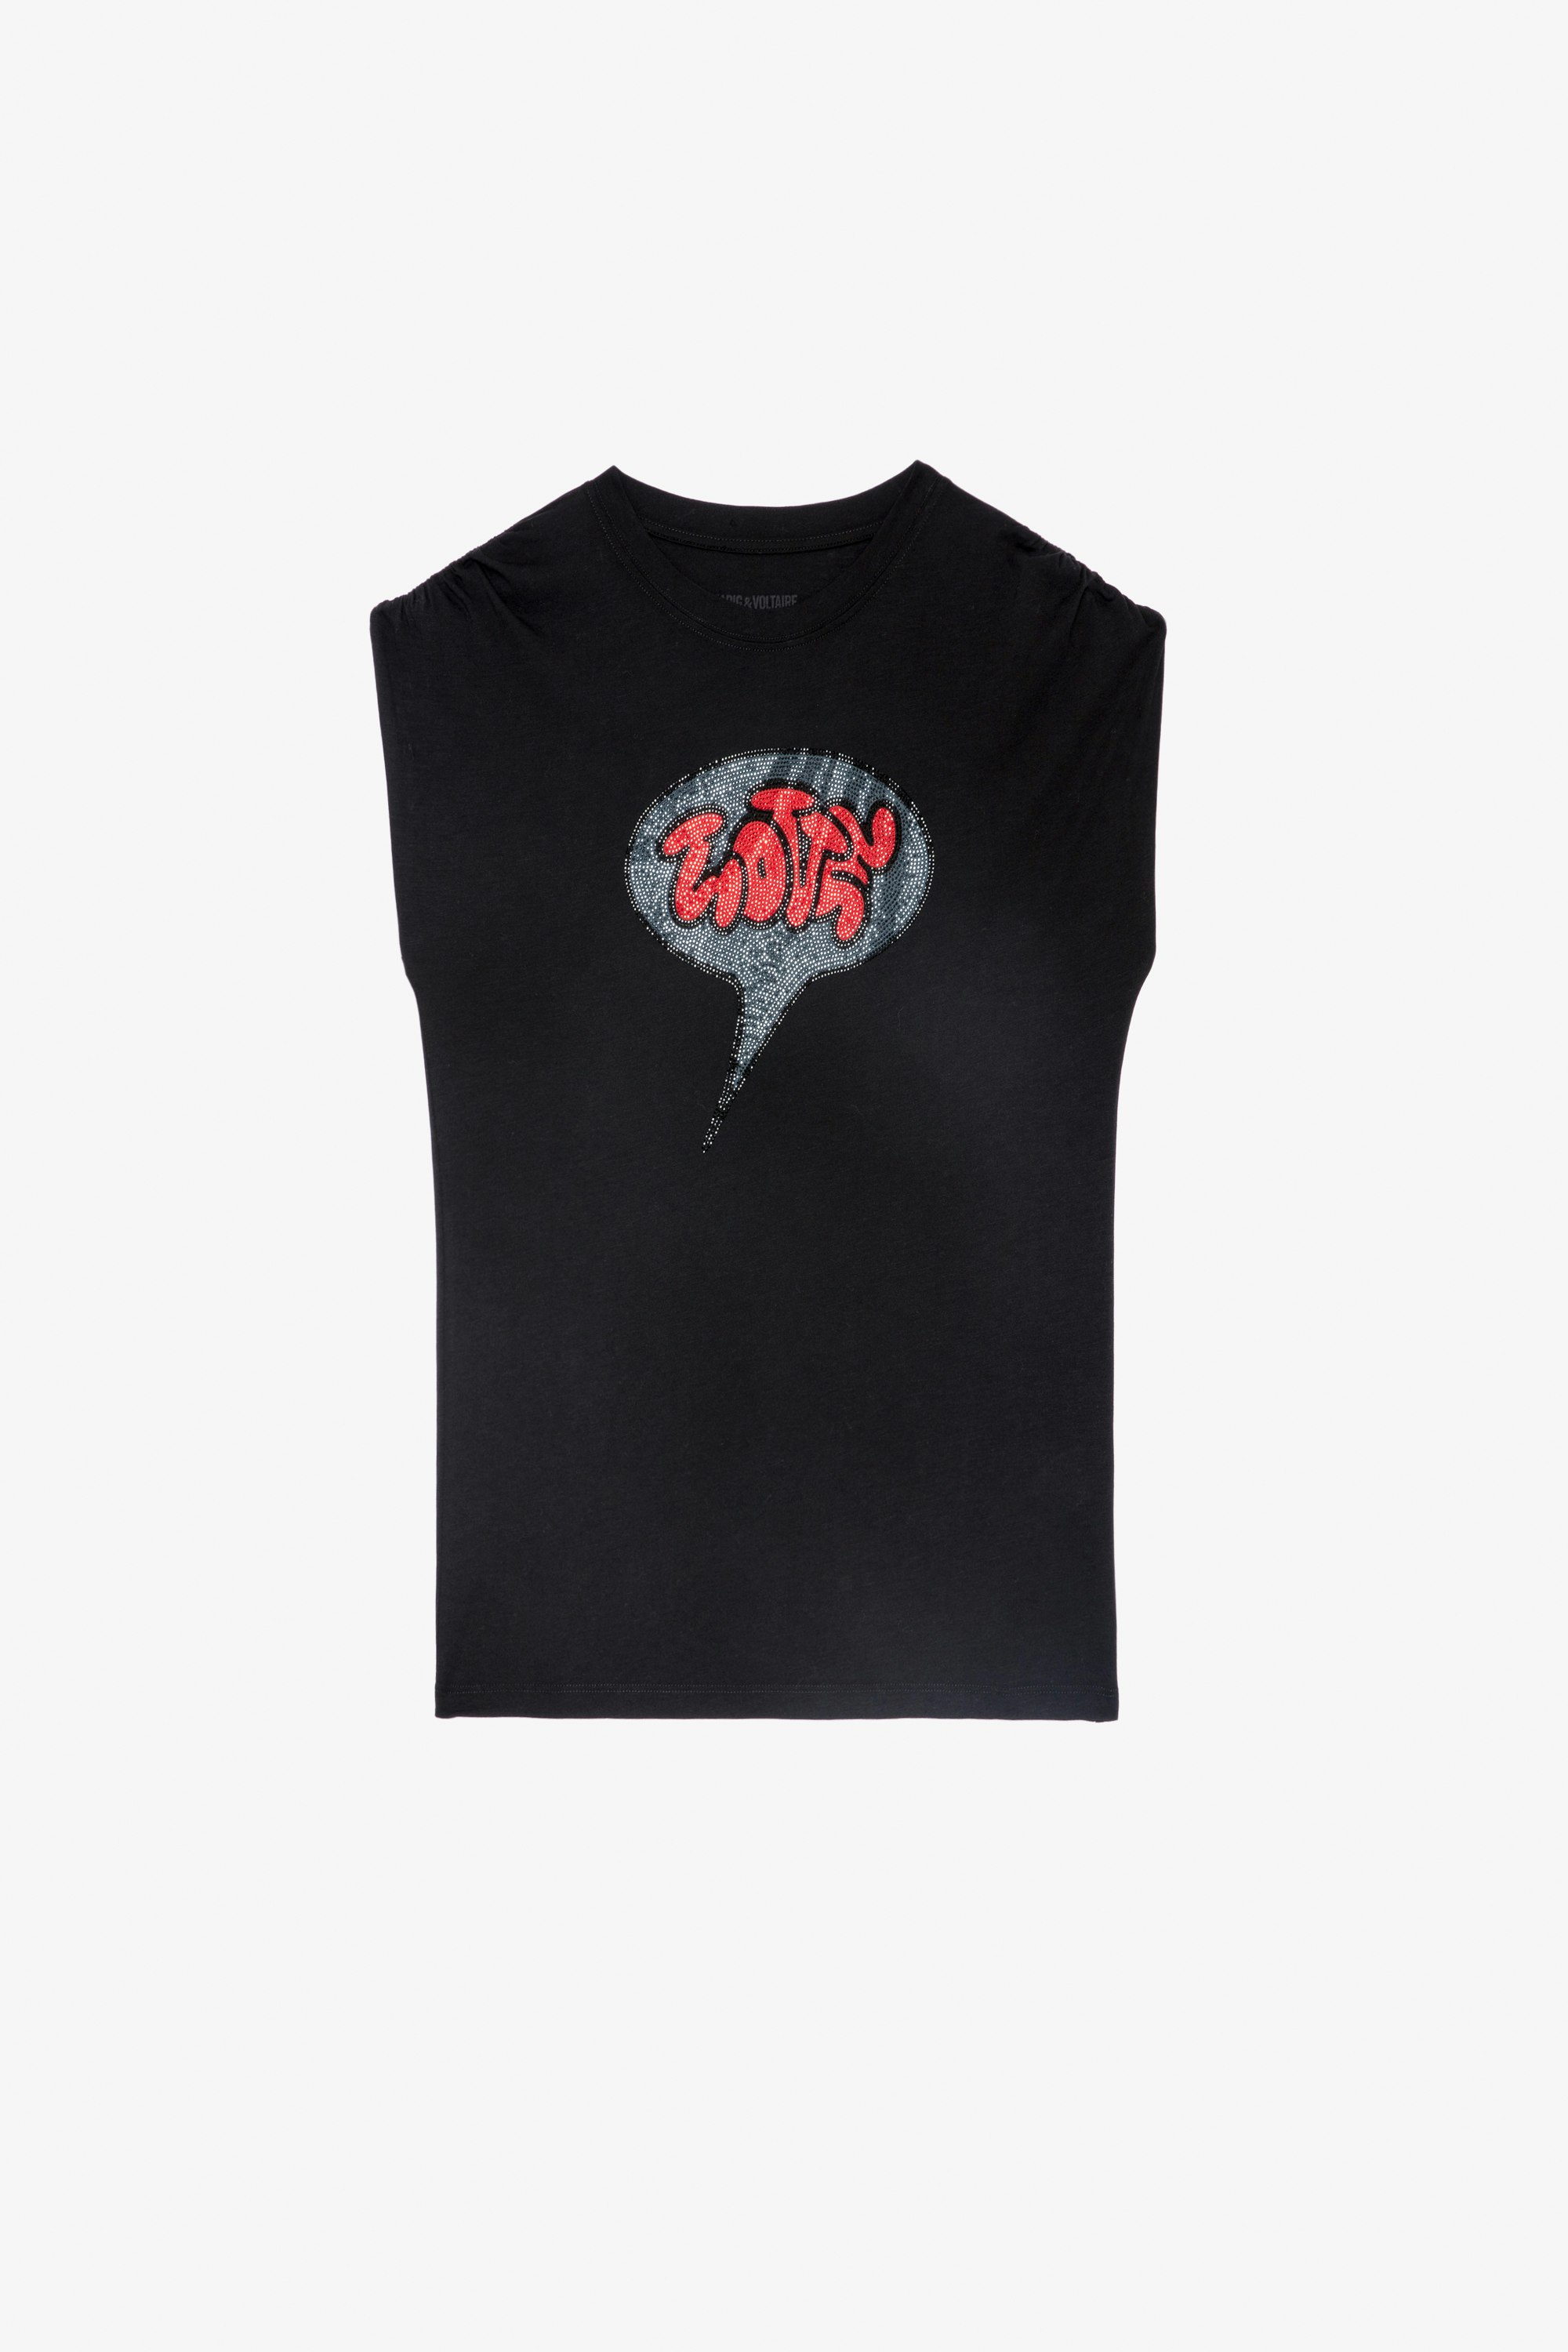 Adele T-Shirt Women’s black T-shirt with short gathered sleeves featuring a crystal-studded Love bubble